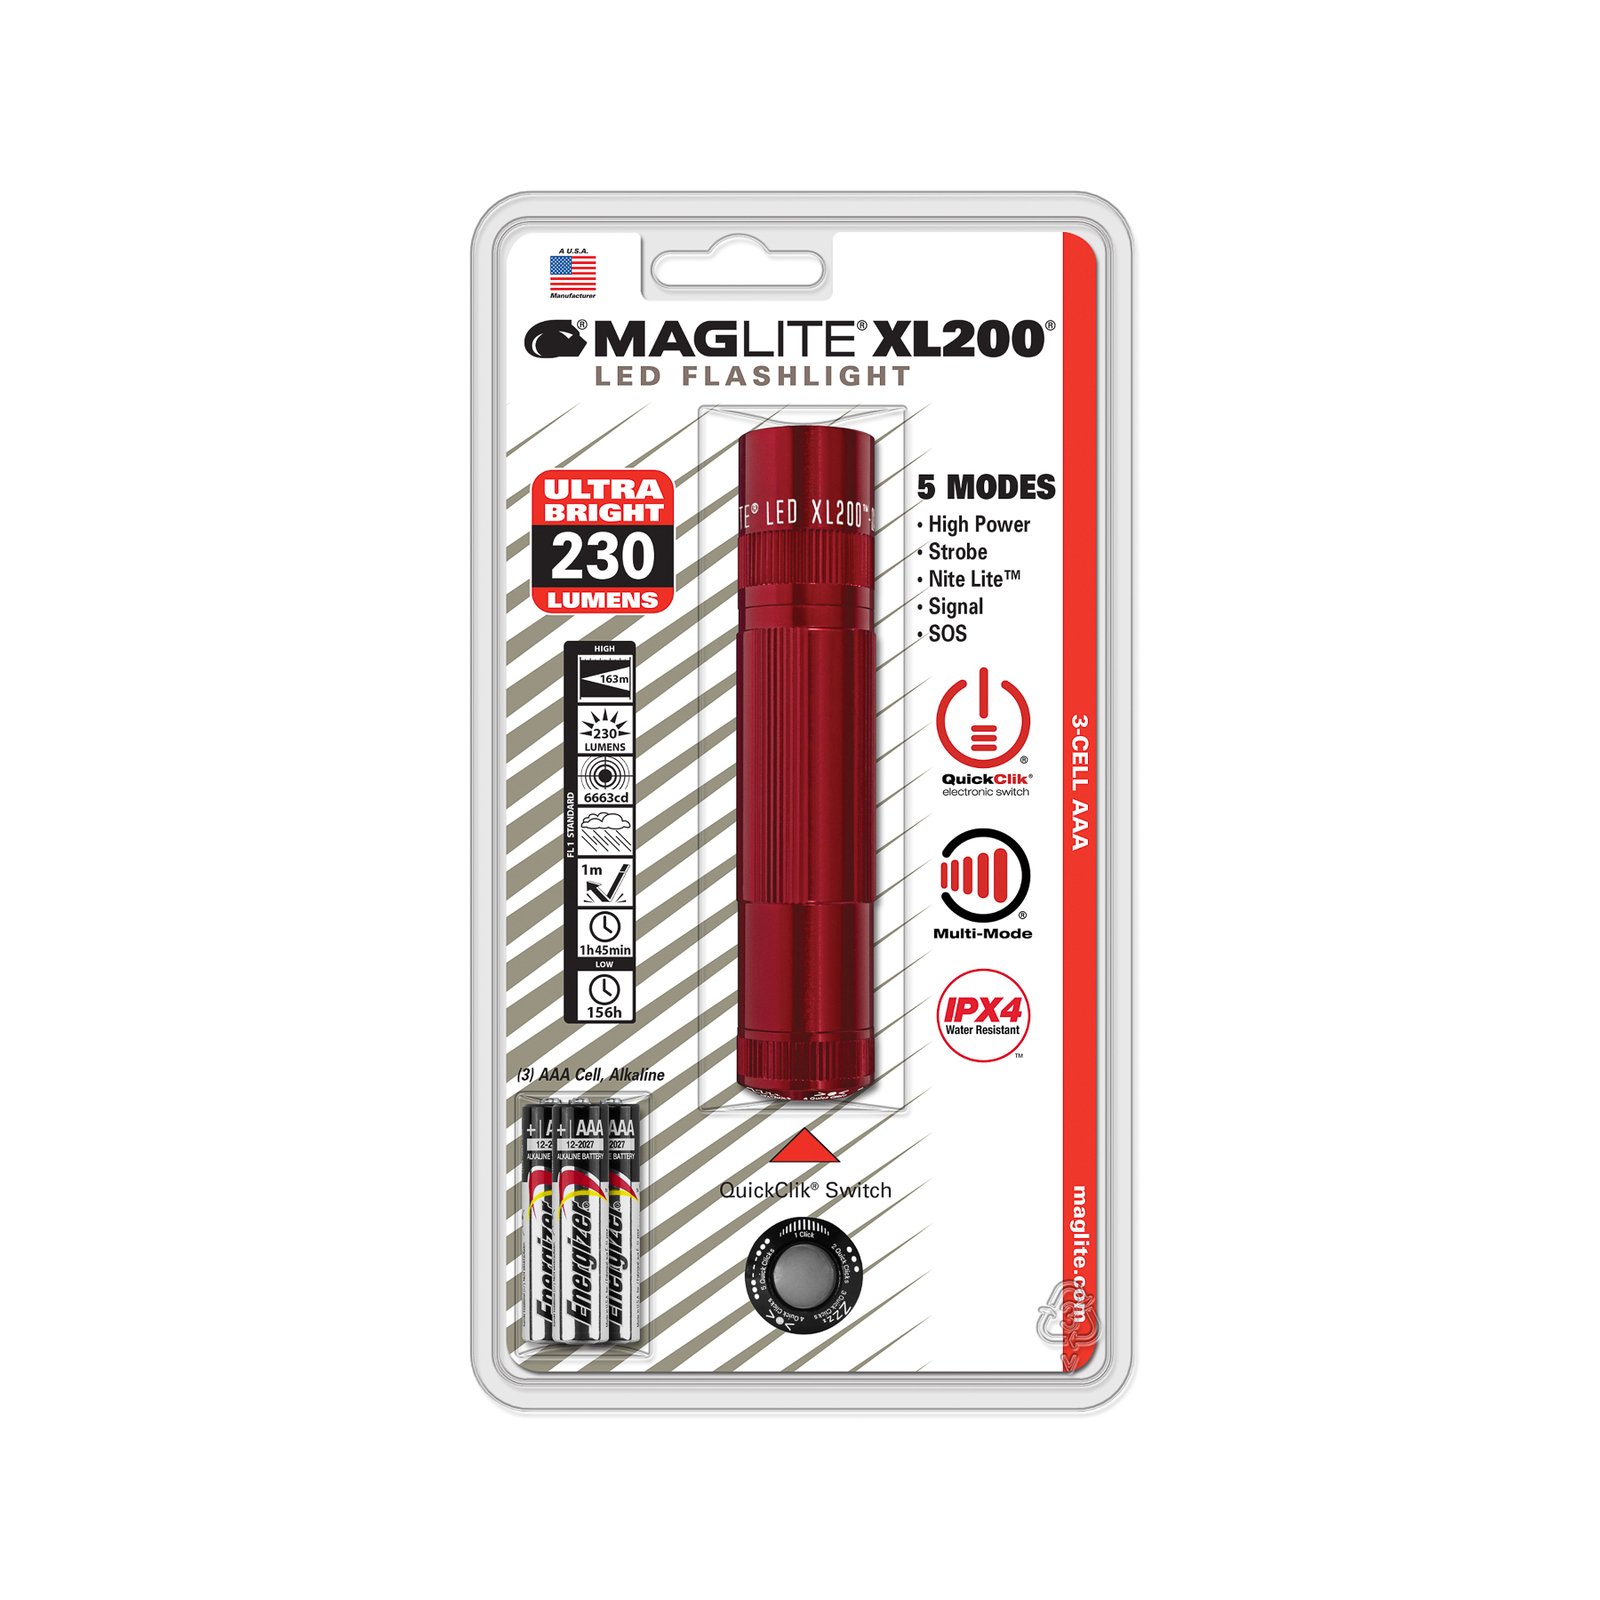 Maglite lampe de poche LED XL200, 3-Cell AAA, rouge